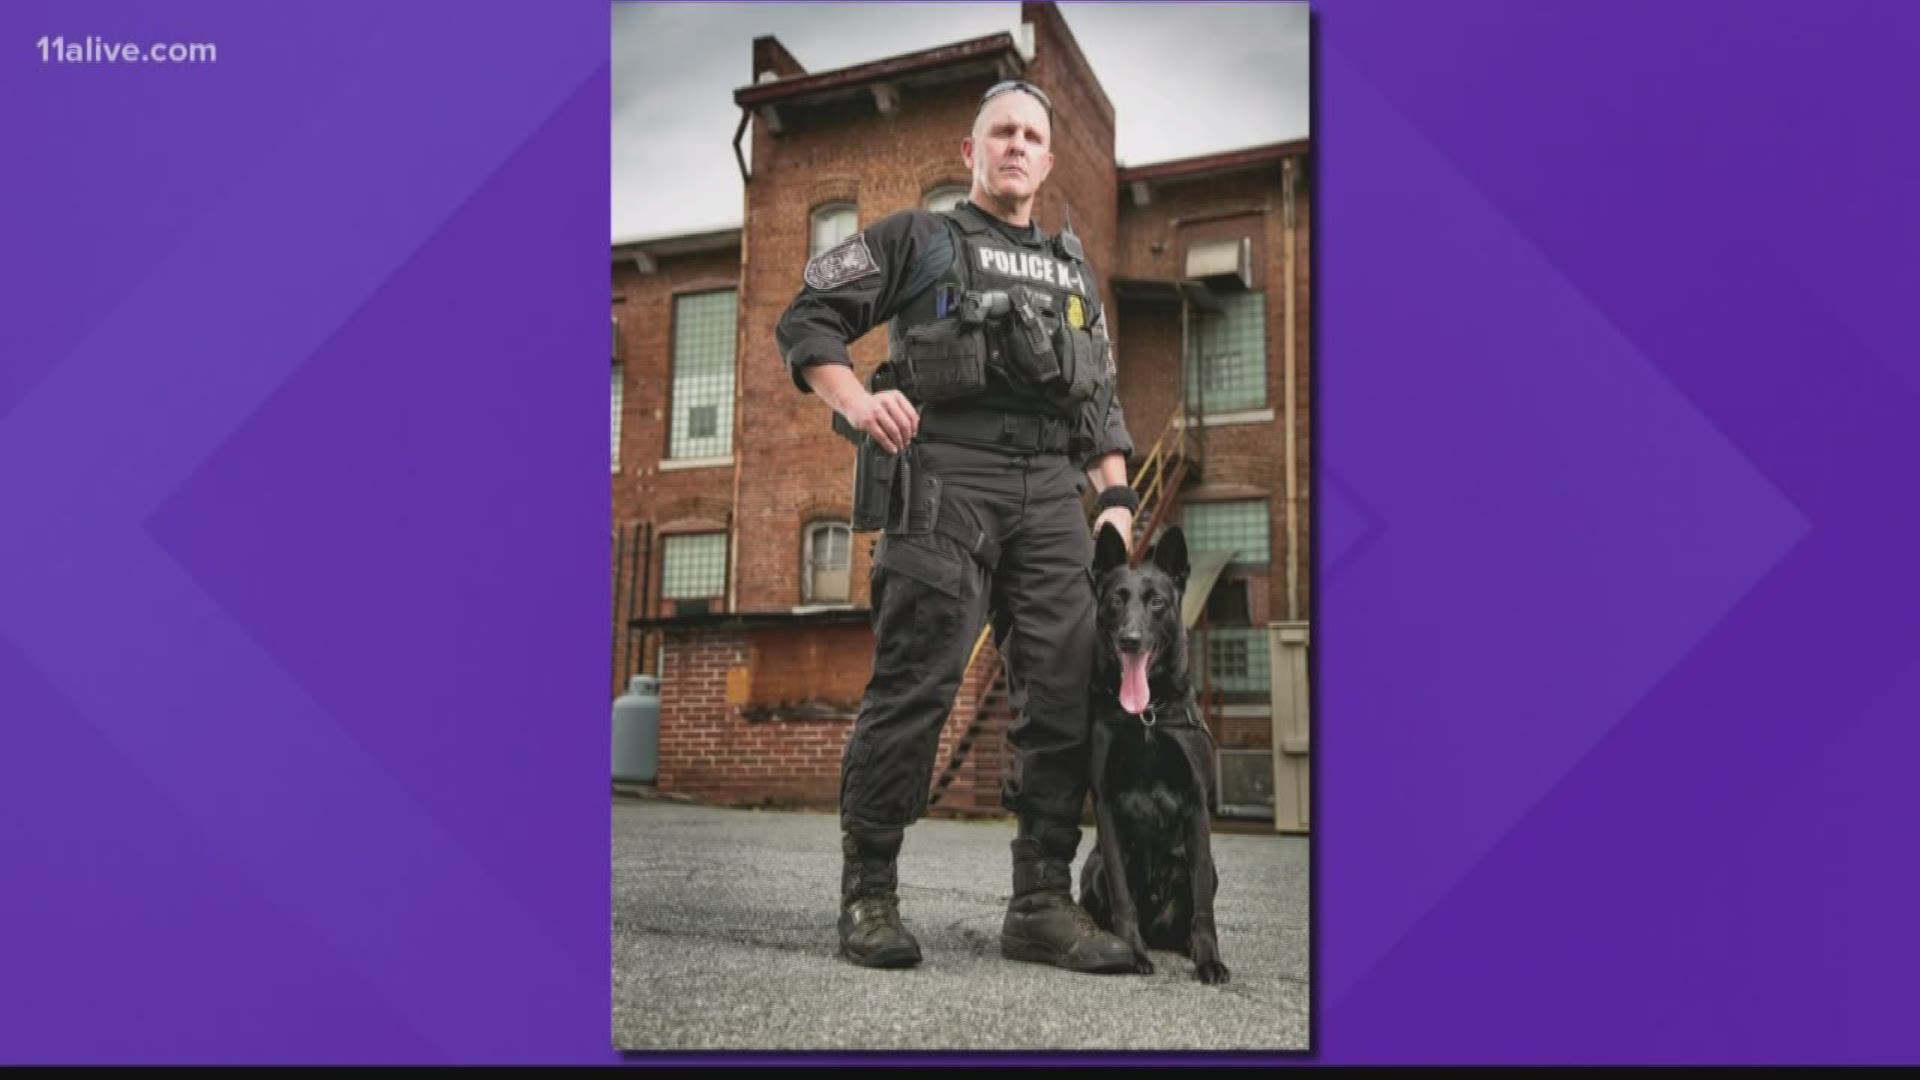 The police K9 was shot while pursuing a suspect.